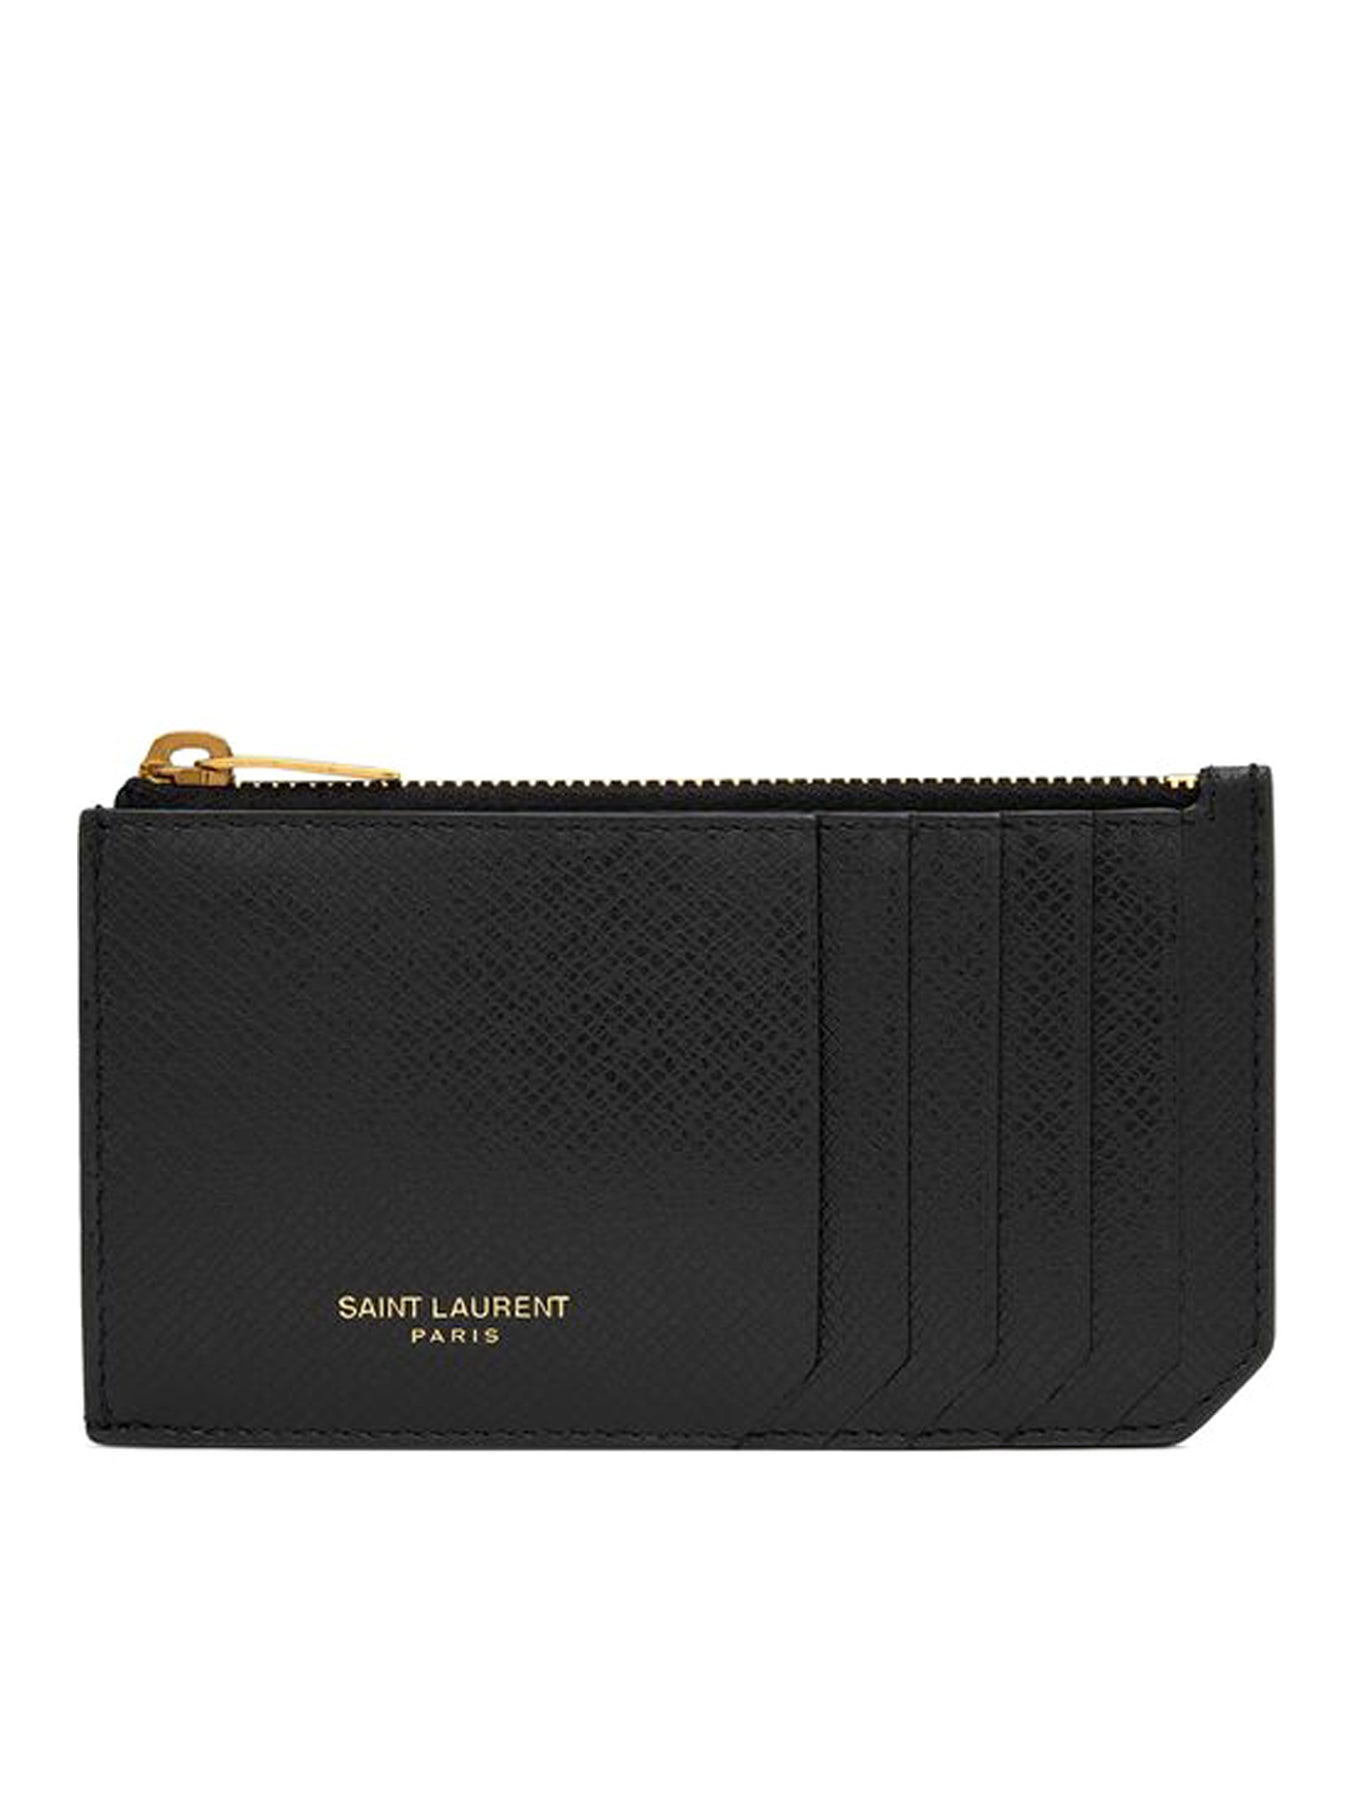 SAINT LAURENT PARIS FRAGMENTS zipped card holder in bark-effect coated leather